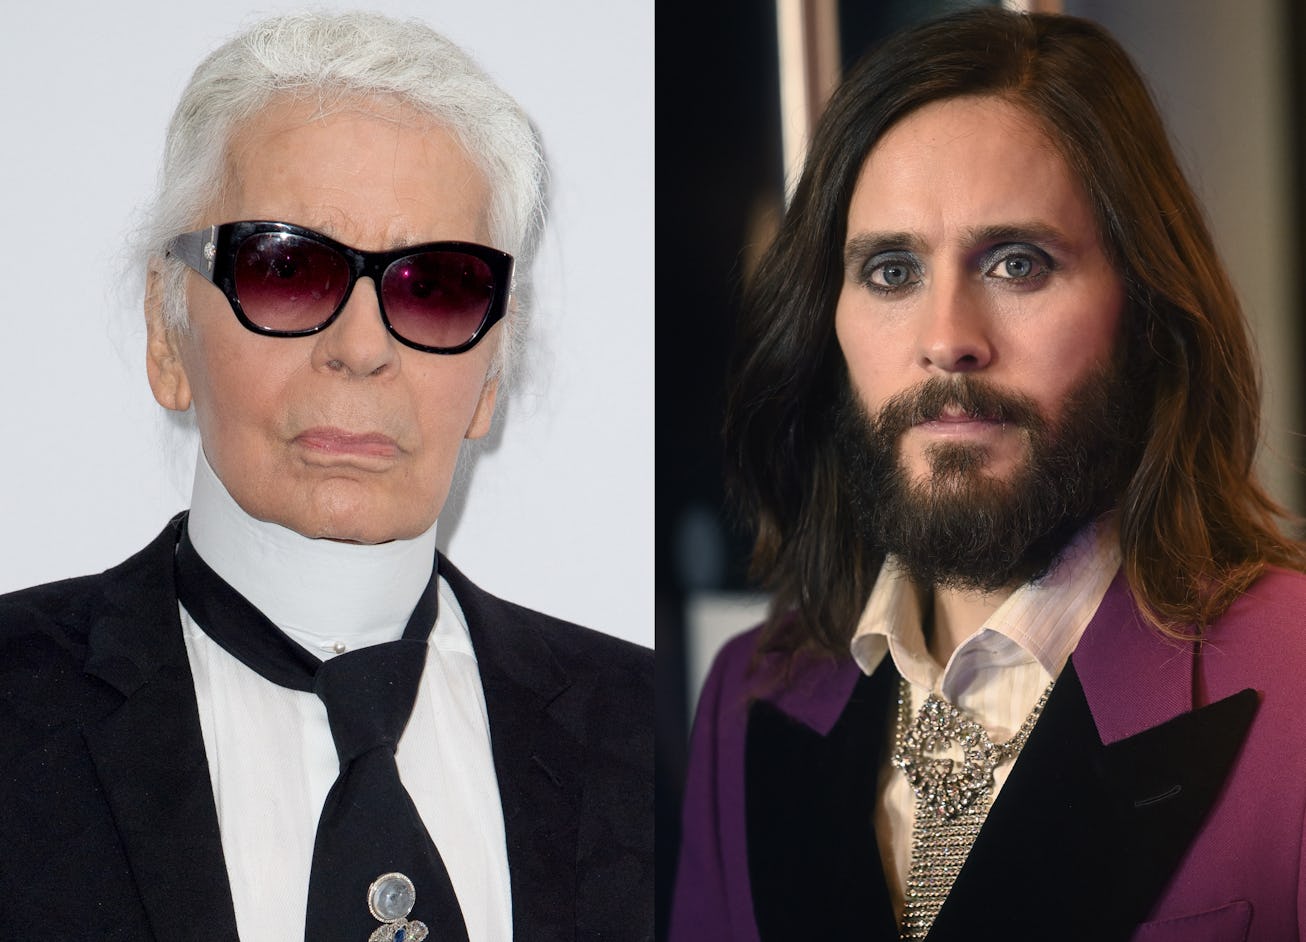 Jared Leto to star as Karl Lagerfield in the famous designer and photographer inspired biopic